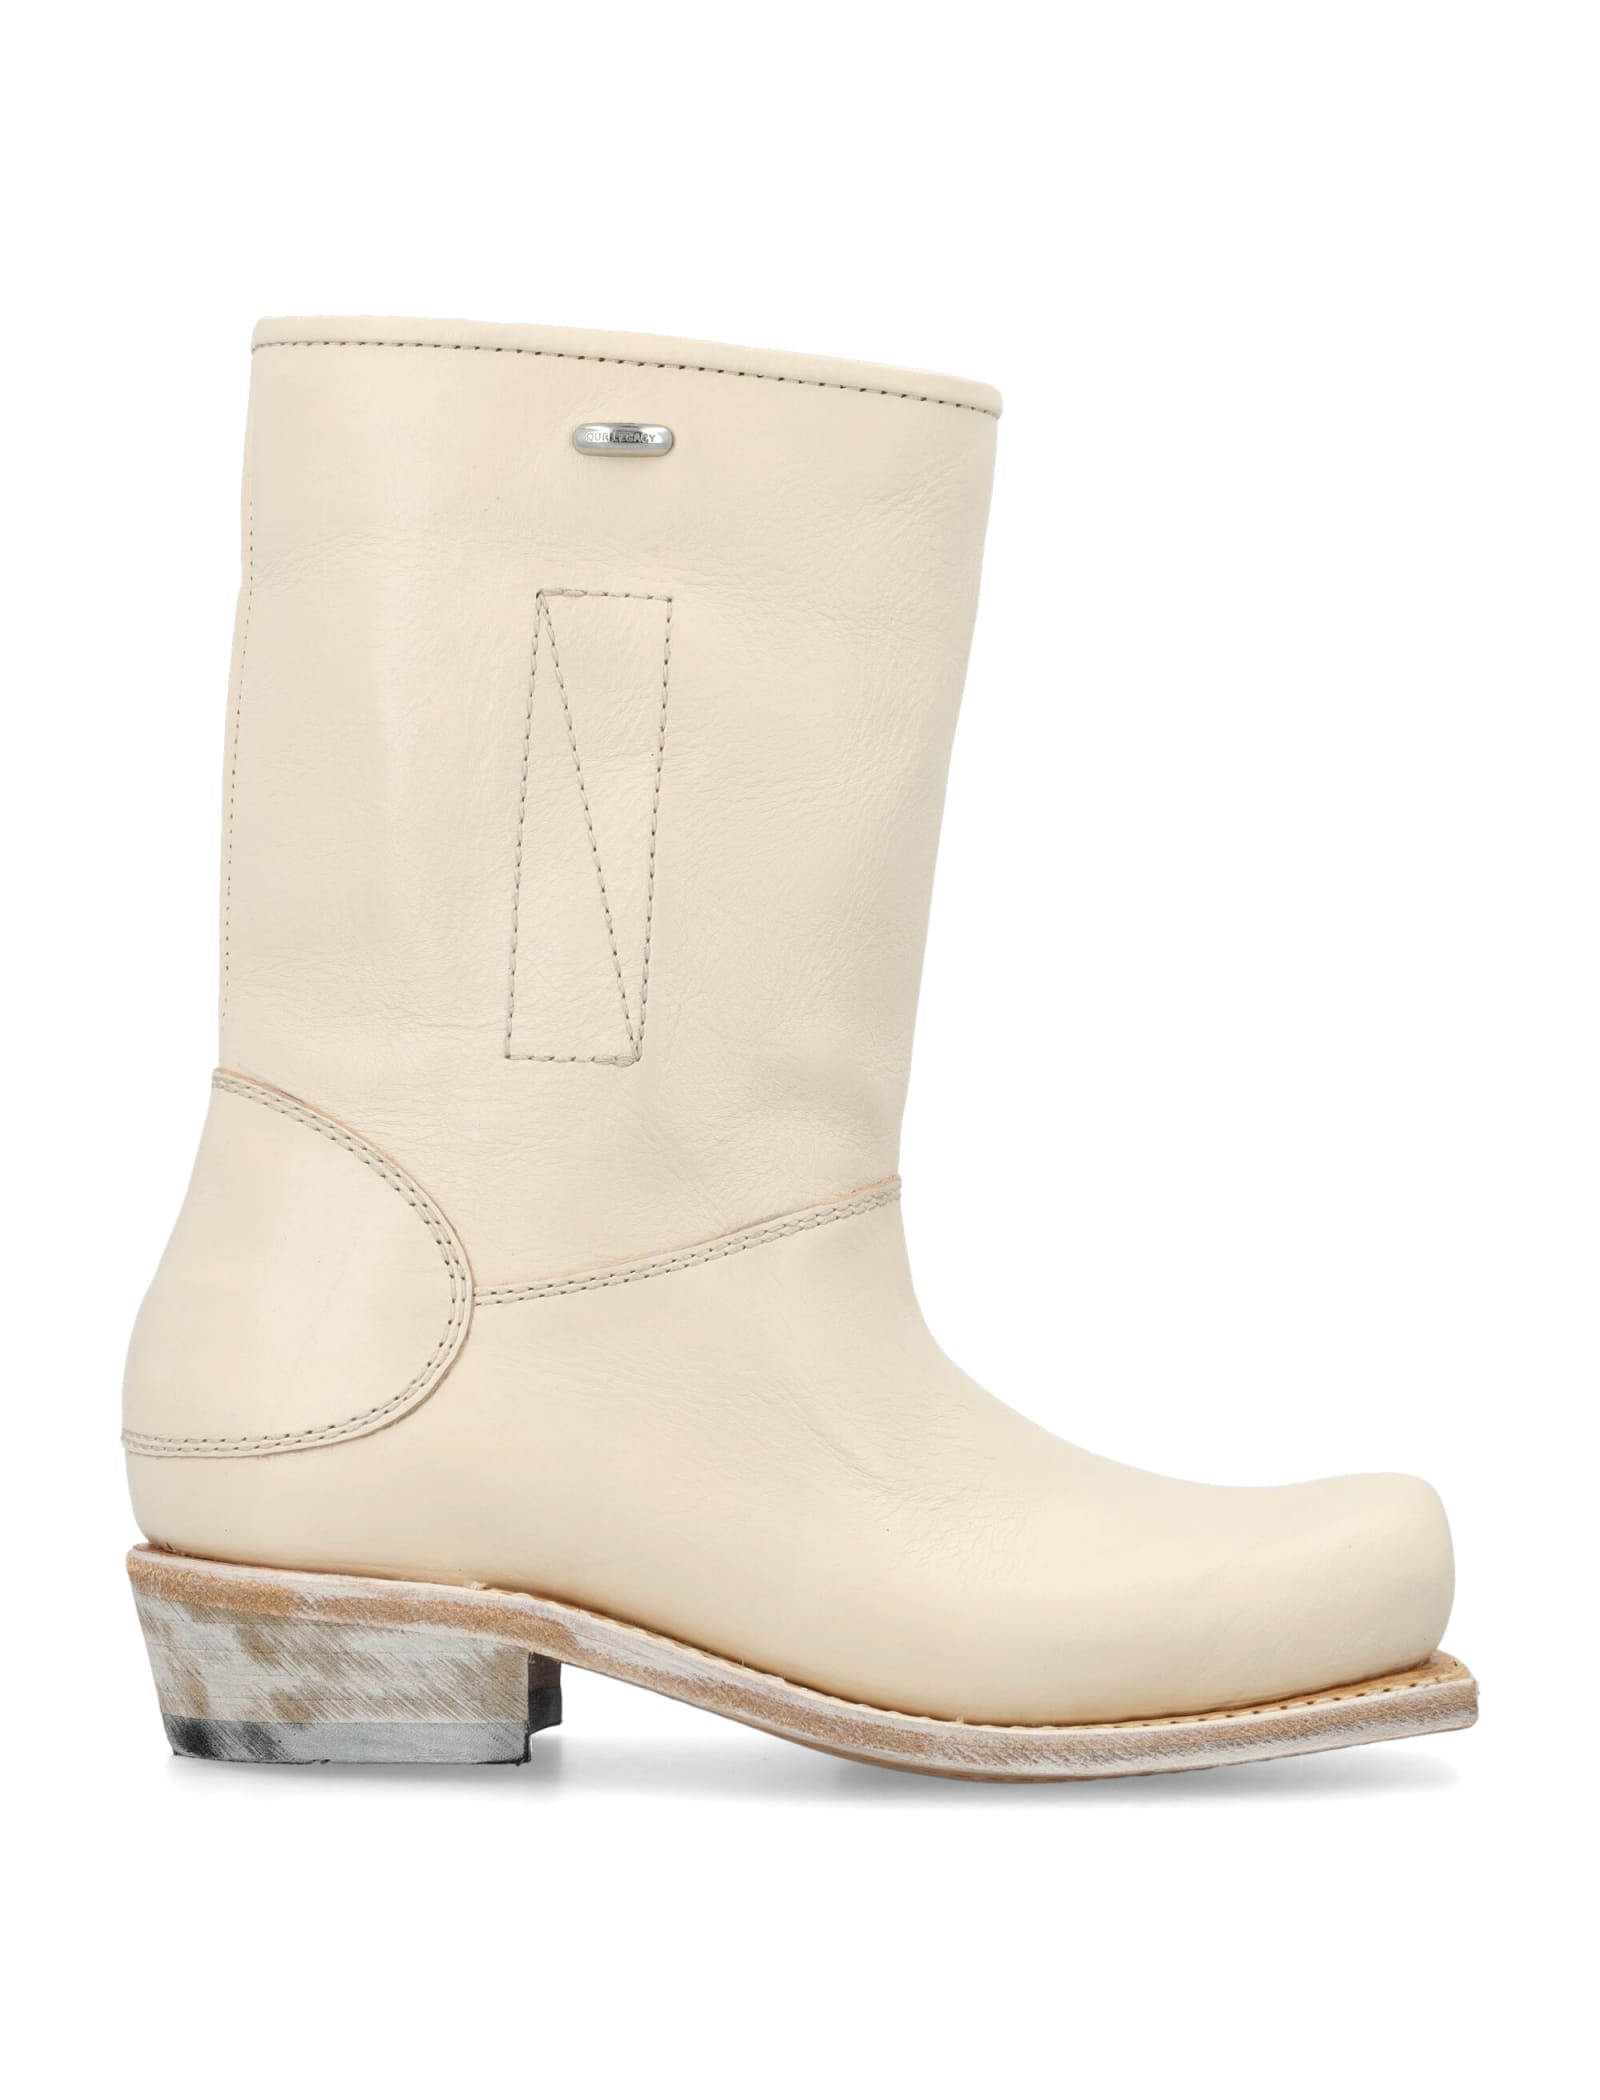 Shop Our Legacy Gear Boots In Vanilla